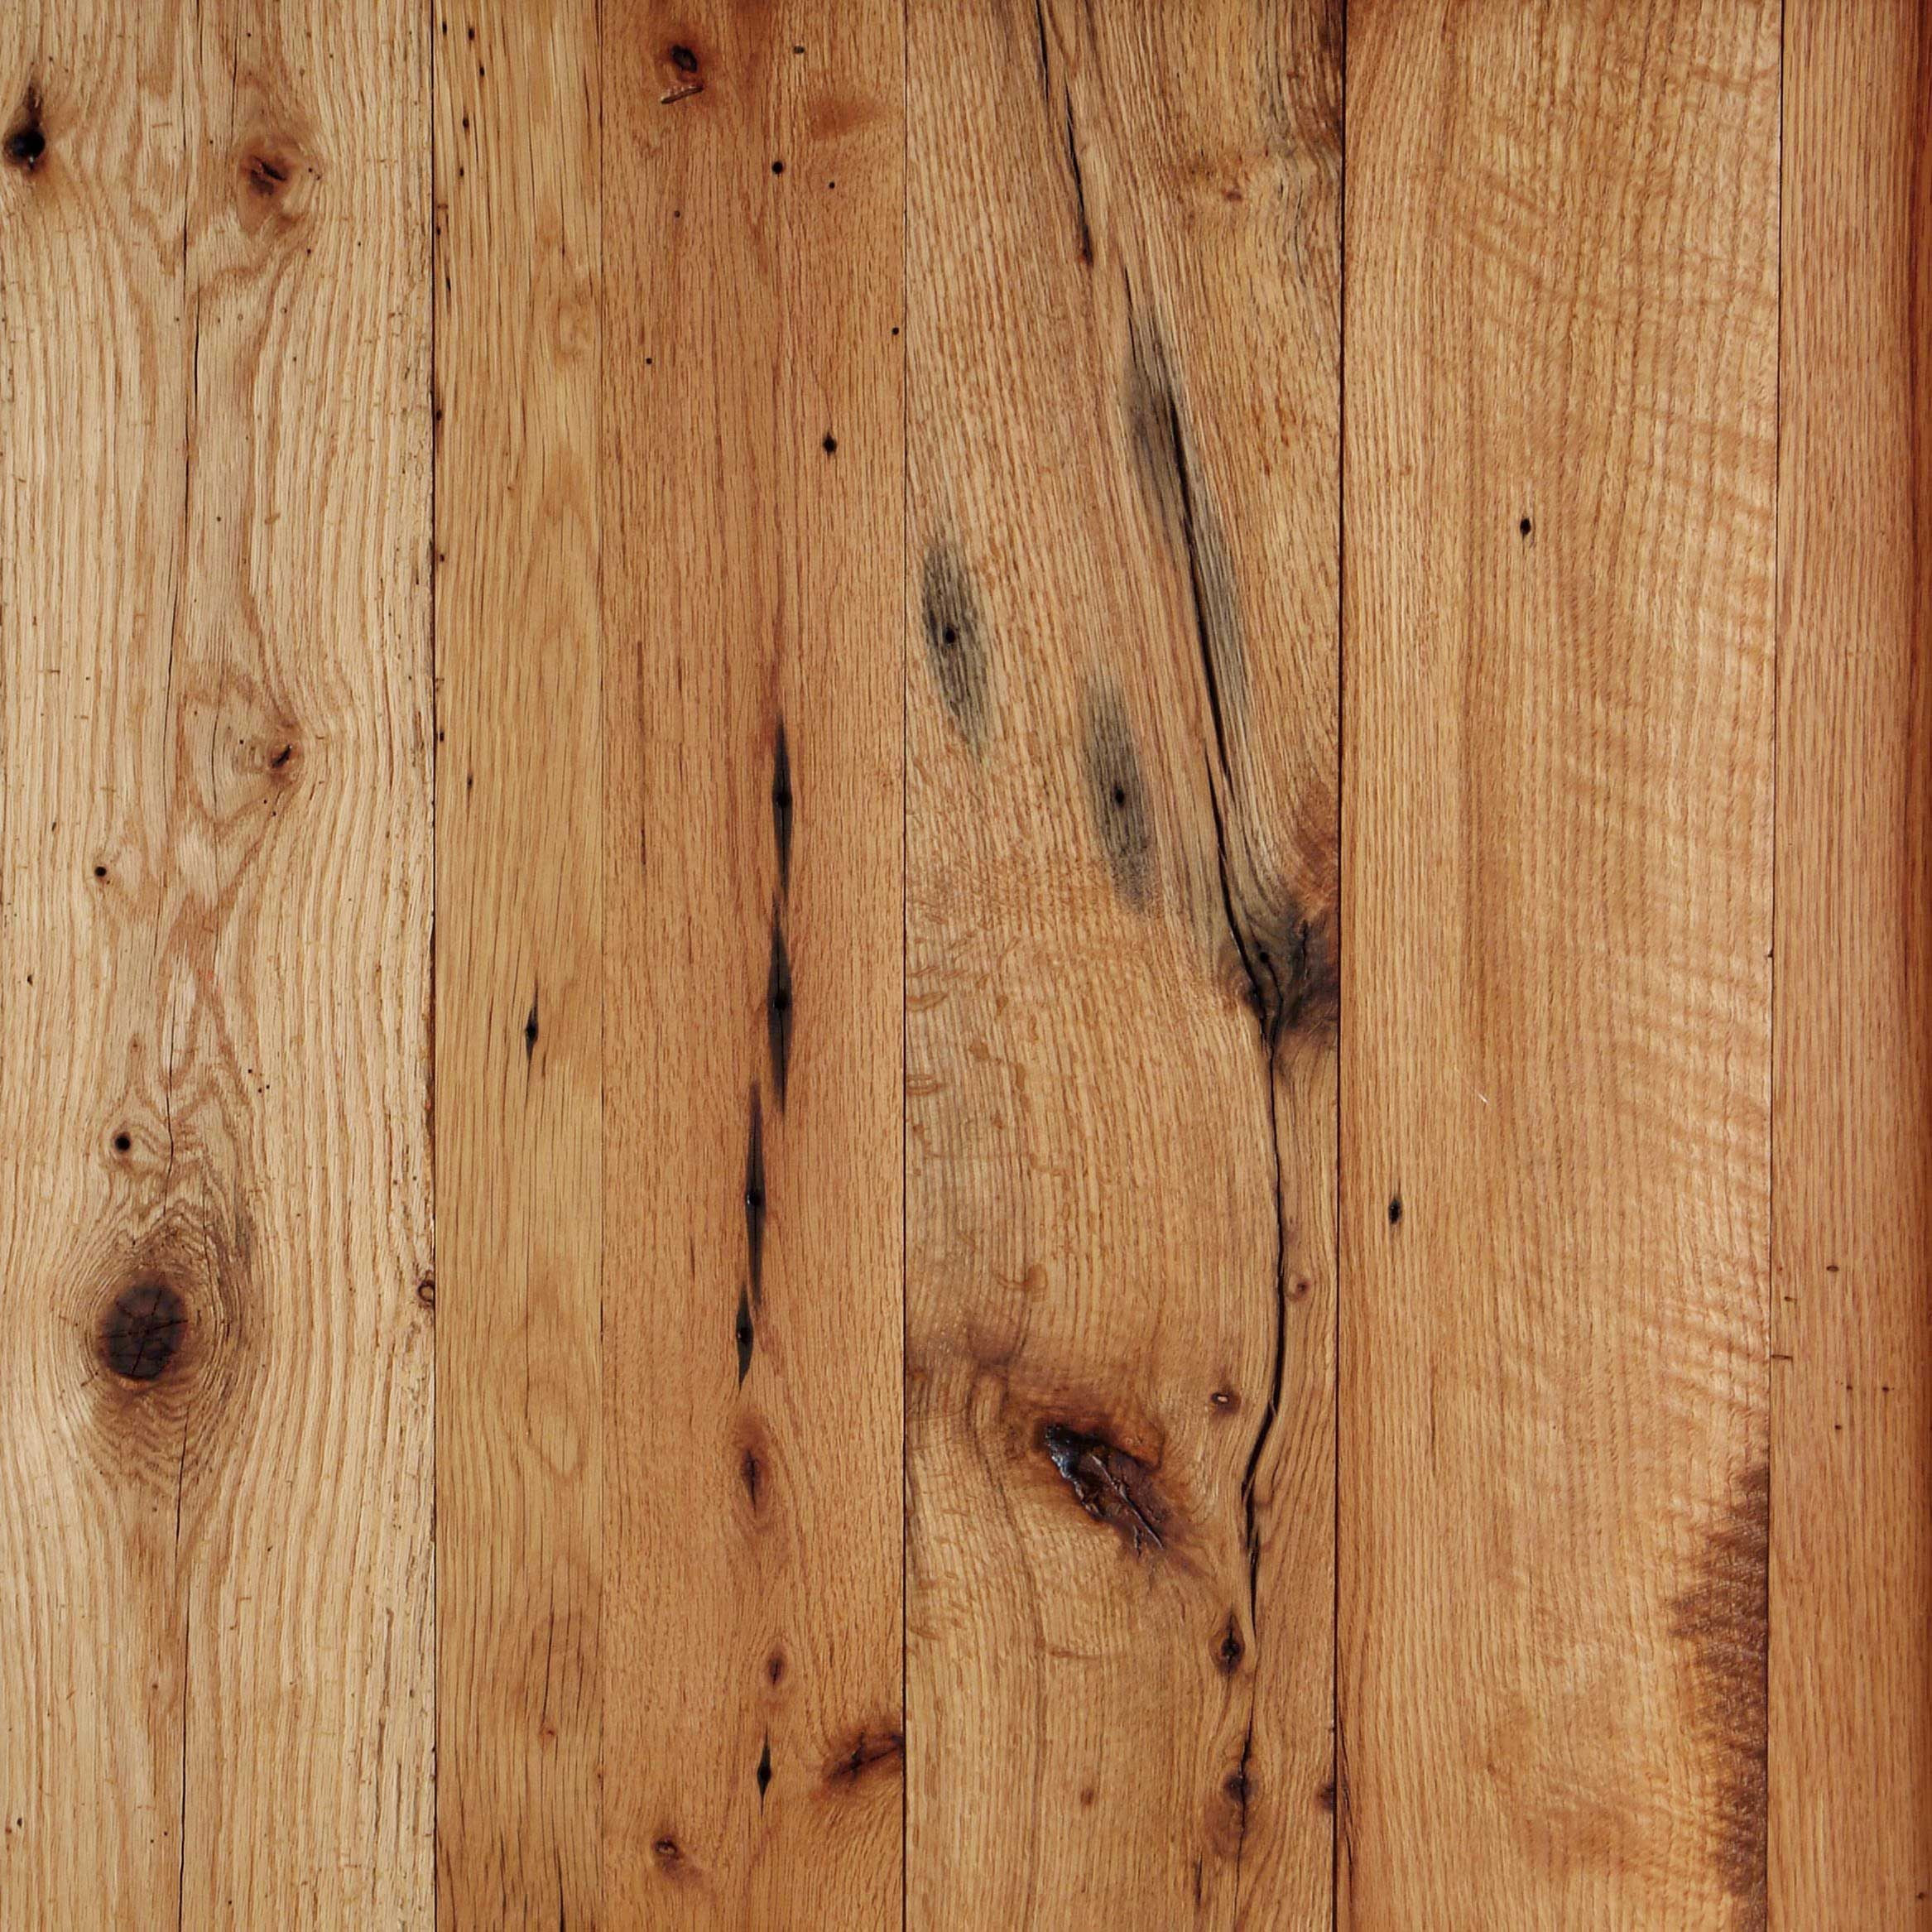 23 Great Hardwood Floor Refinishing Pittsburgh Pa 2024 free download hardwood floor refinishing pittsburgh pa of reclaimed salvaged antique red oak flooring wide boards knots within reclaimed salvaged antique red oak flooring wide boards knots